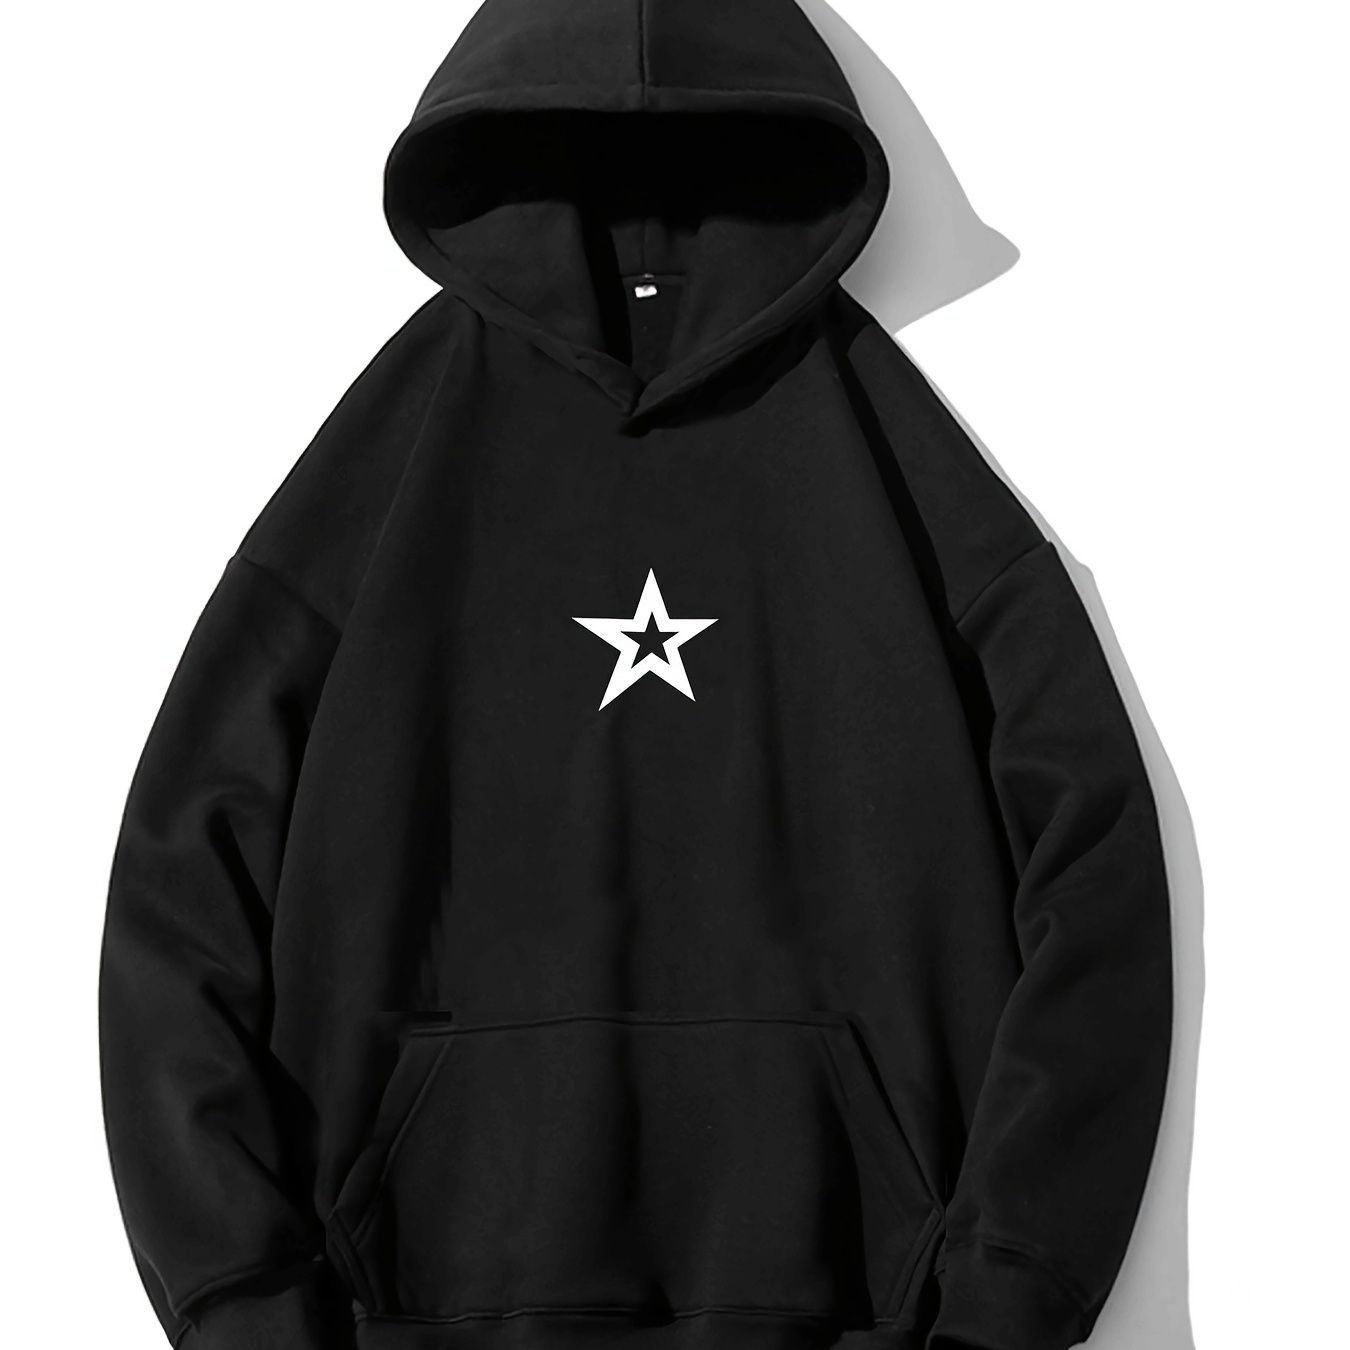 

Star Print Men's Punk Style Pullover Round Neck Hoodies With Kangaroo Pocket Long Sleeve Hooded Sweatshirt Loose Casual Top For Autumn Winter Men's Clothing As Gifts